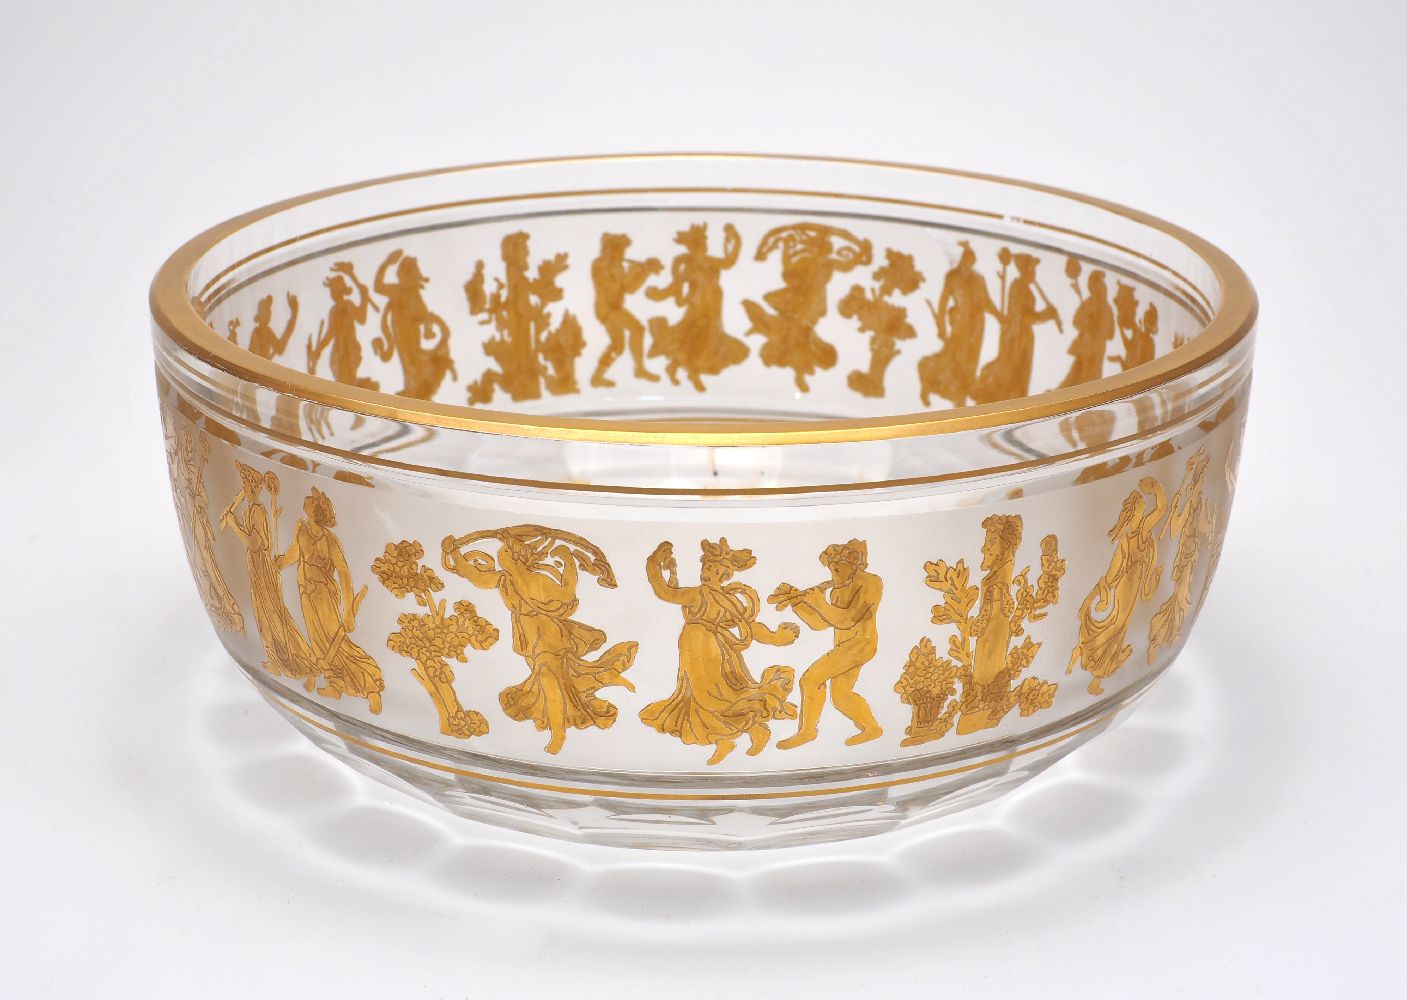 A Val St Lambert Danse de Flore glass bowl, late 20th century, the body decorated with gilt